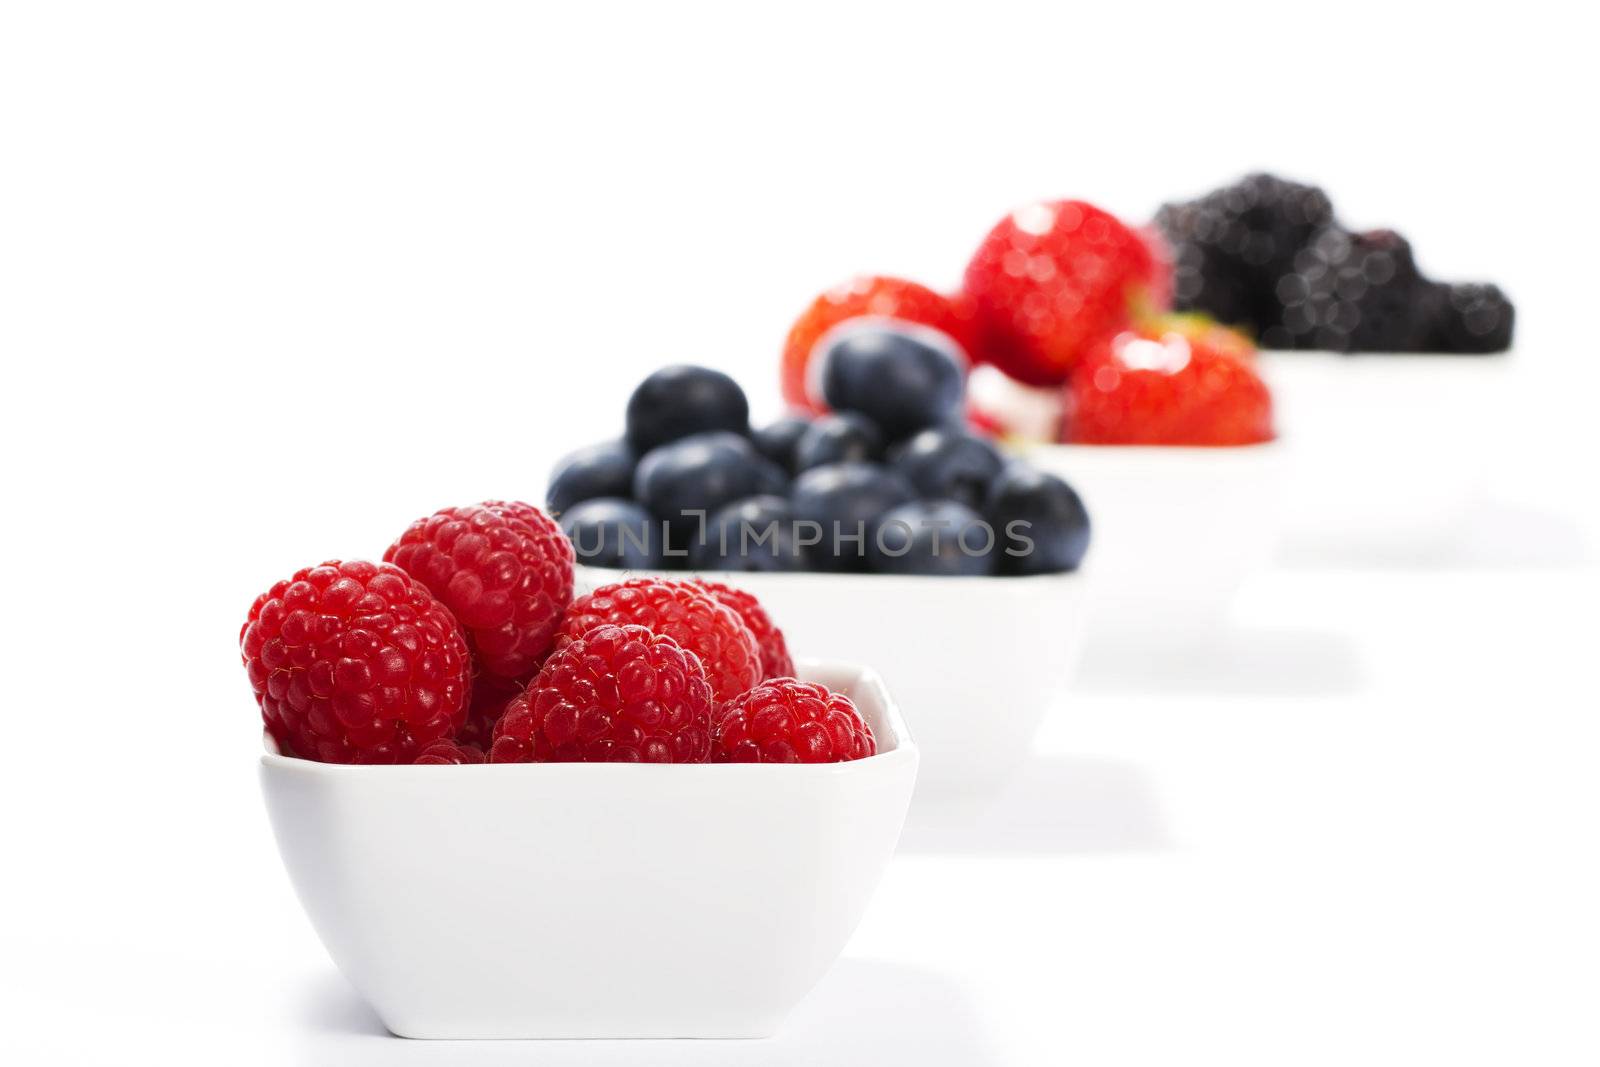 raspberries in front of wild berries in bowls on white background